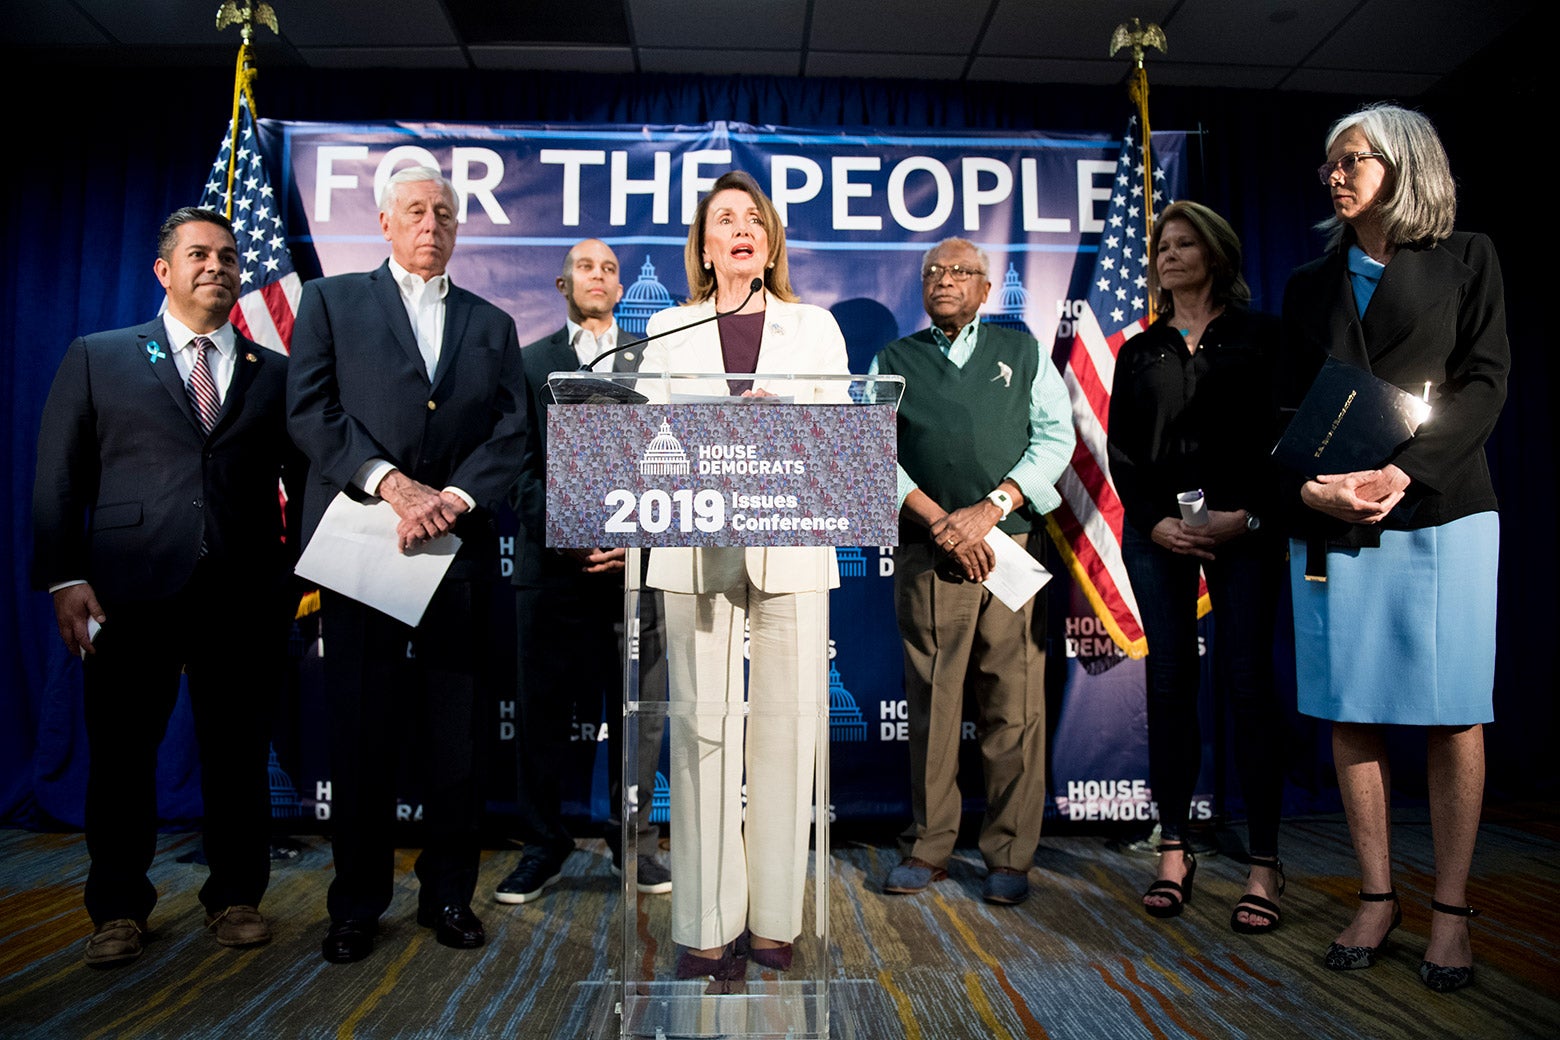 Speaker of the House Nancy Pelosi speaking at a podium, flanked from left by Assistant Democratic Leader Ben Ray Luján, House Majority Leader Steny Hoyer, Democratic Caucus Chair Hakeem Jeffries, House Majority Whip Jim Clyburn, Democratic Congressional Campaign Committee Chair Cheri Bustos, and Democratic Caucus Vice Chair Katherine Clark.